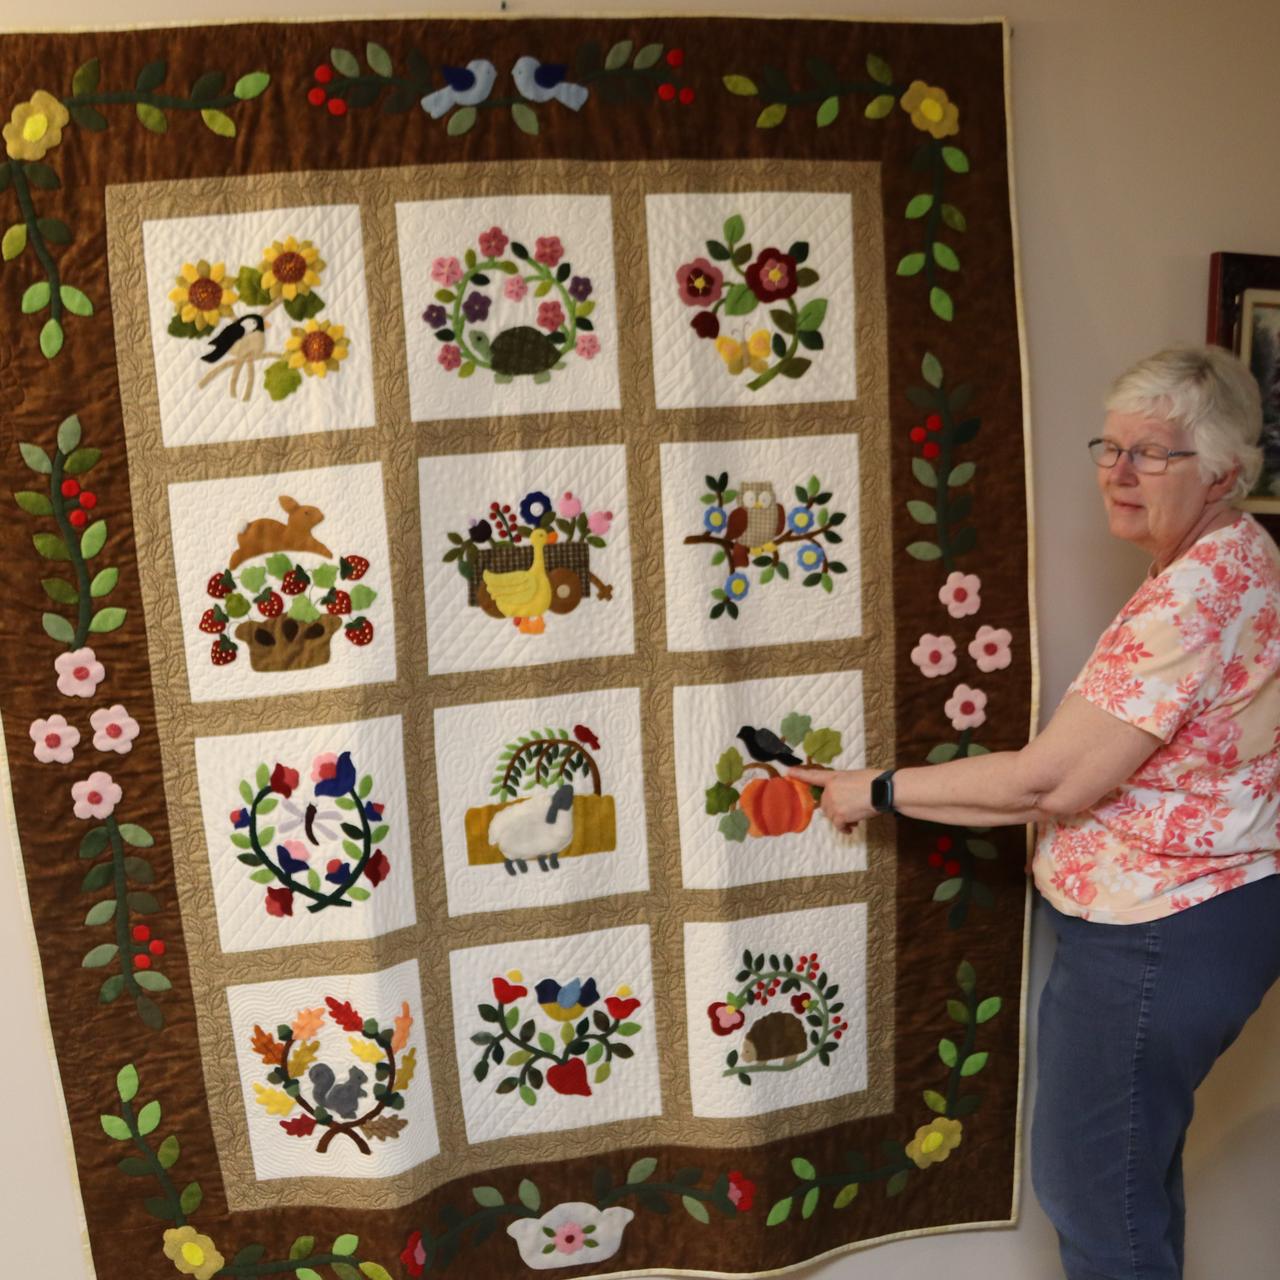 Barbara Boothe shows her lovely quilt